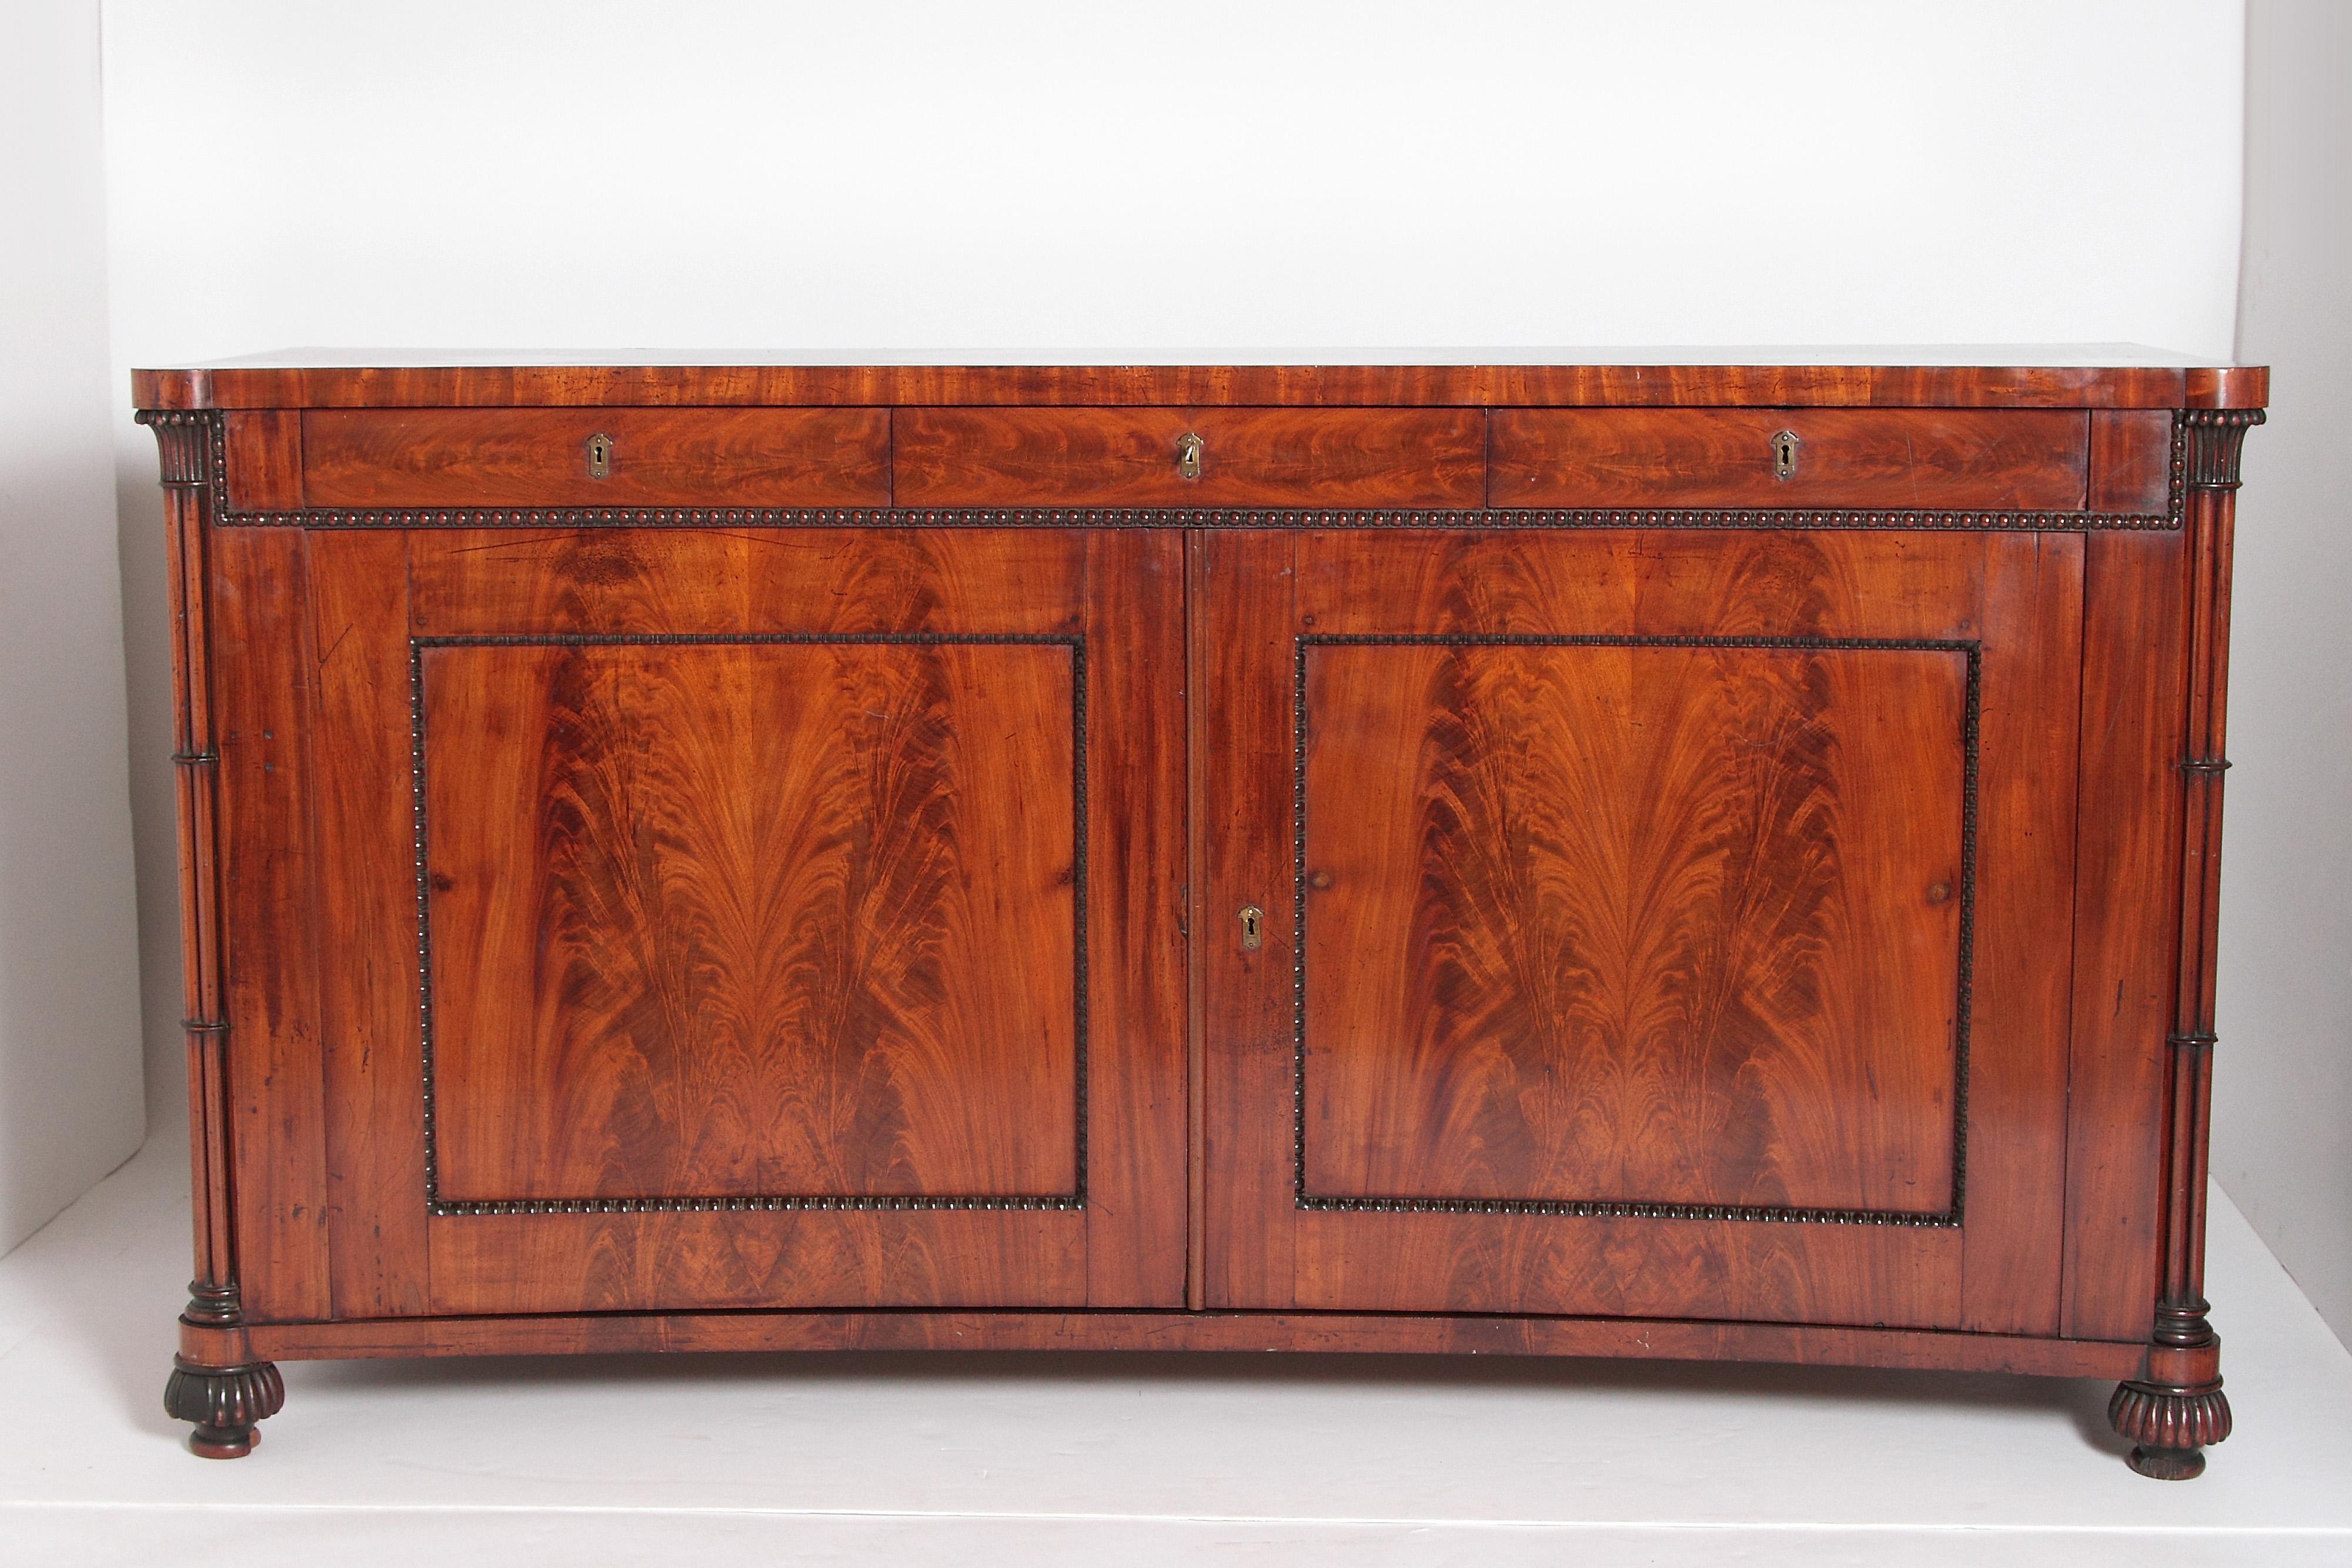 An English Regency mahogany cabinet with concave shaped top above three frieze drawers. Below are two large flame mahogany doors with carved bead borders. The interior contains four small drawers above one shelf. Reeded columns at the sides with